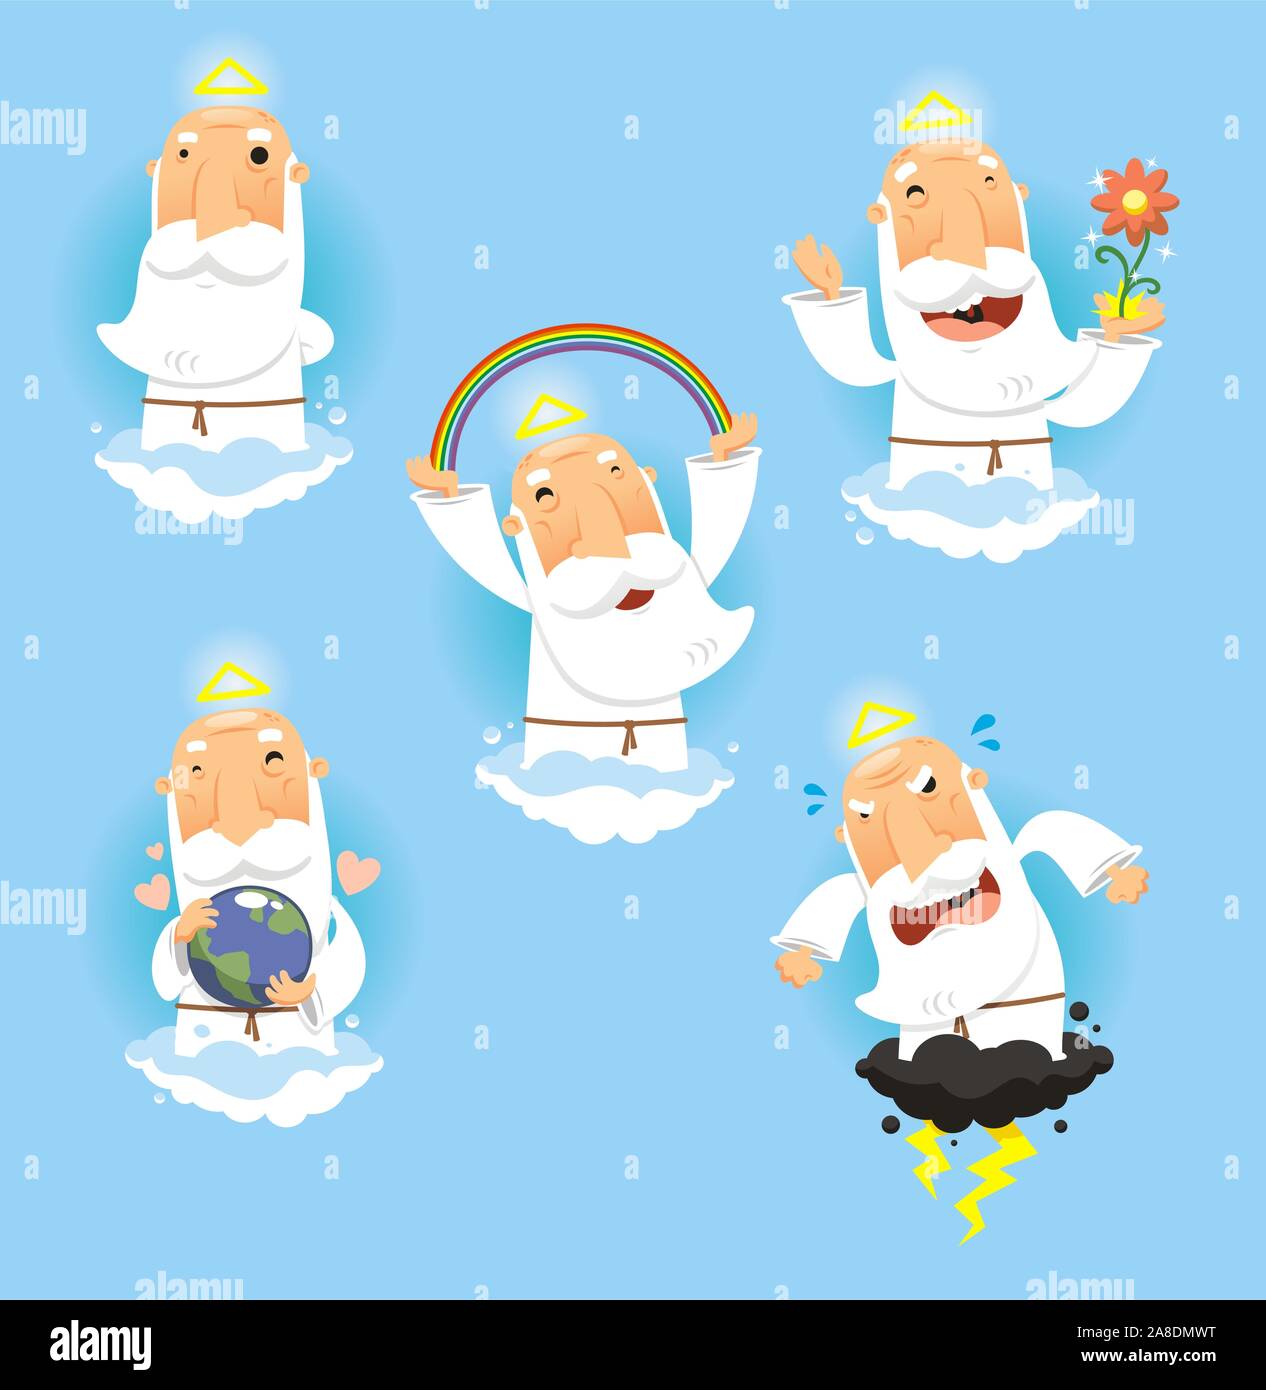 God in Heaven set, with God standing contemplating, God making a rainbow, God happy with nature, God embracing and holding the earth and angry and fur Stock Vector